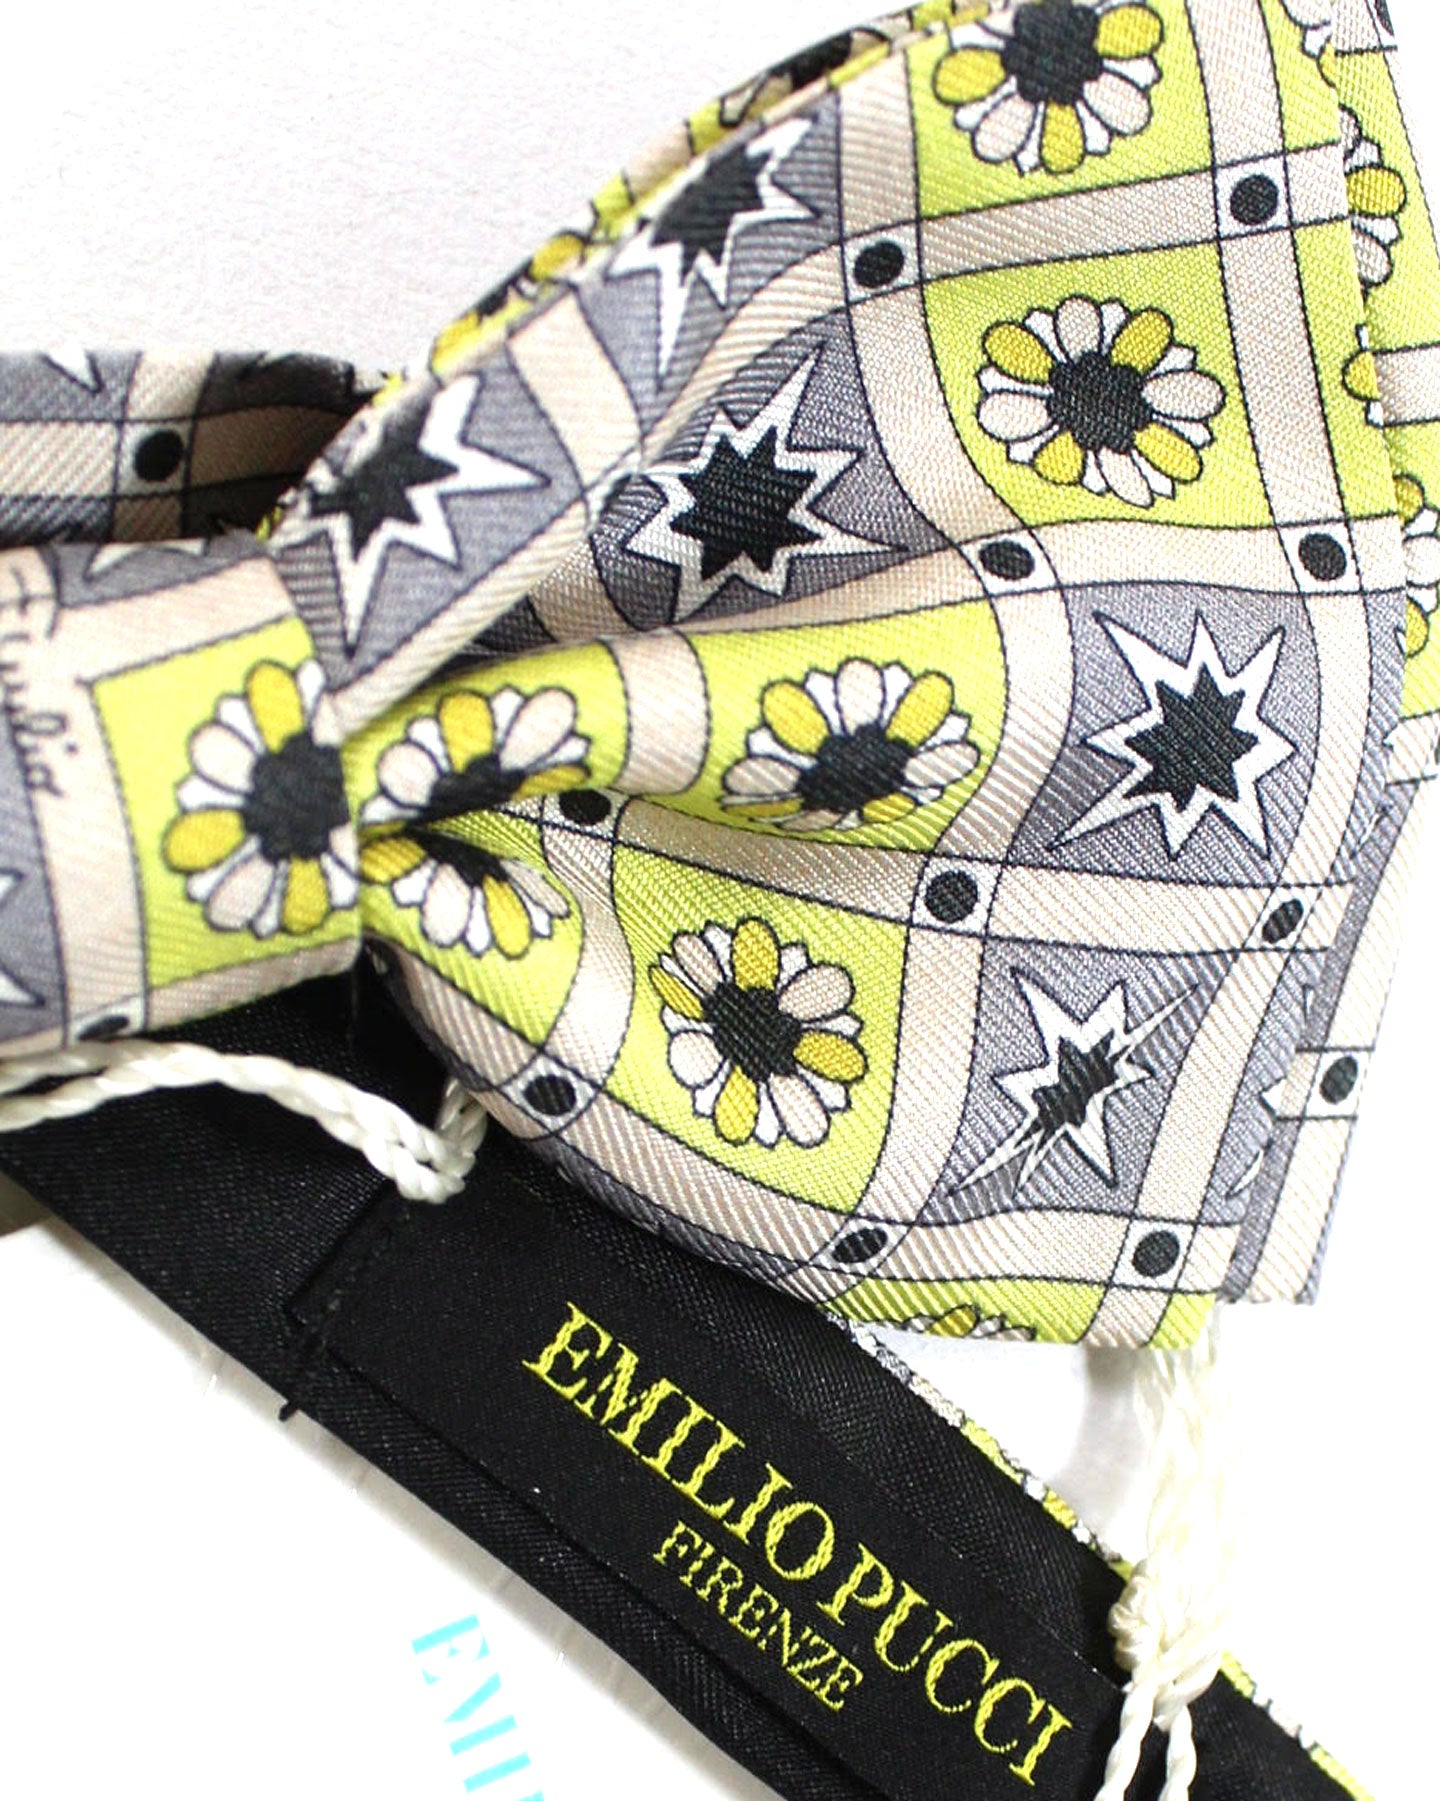 Emilio Pucci Silk Bow Tie Gray Bright Yellow Floral Gingham Design - Made In Italy